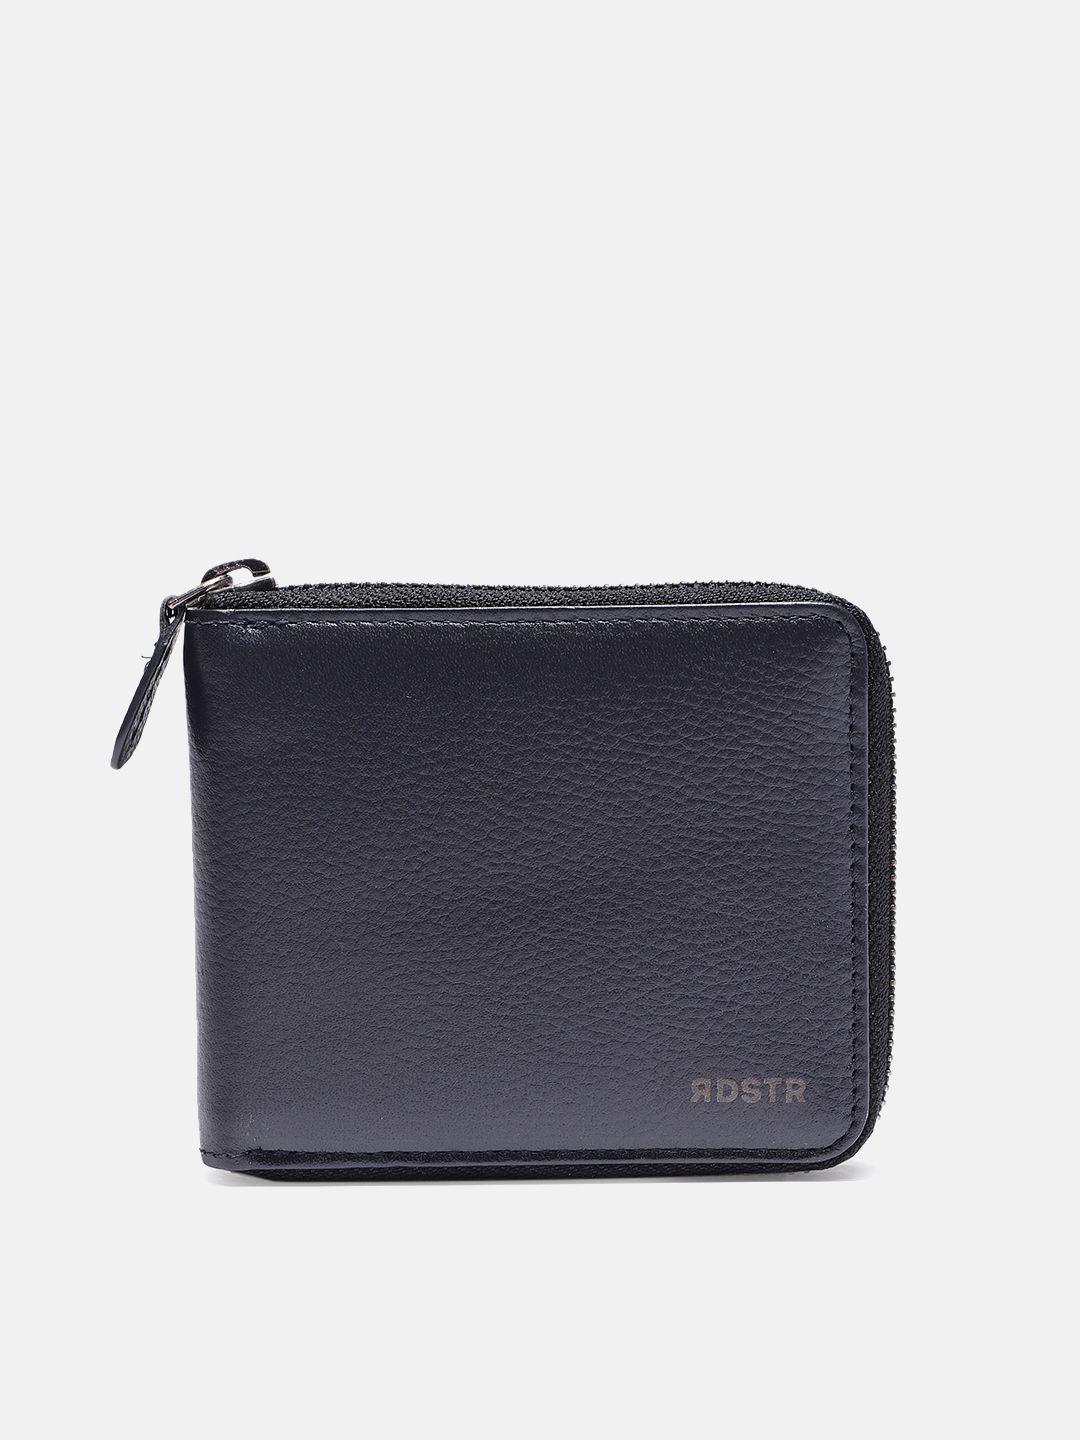 the roadster lifestyle co men navy blue solid leather zip around wallet